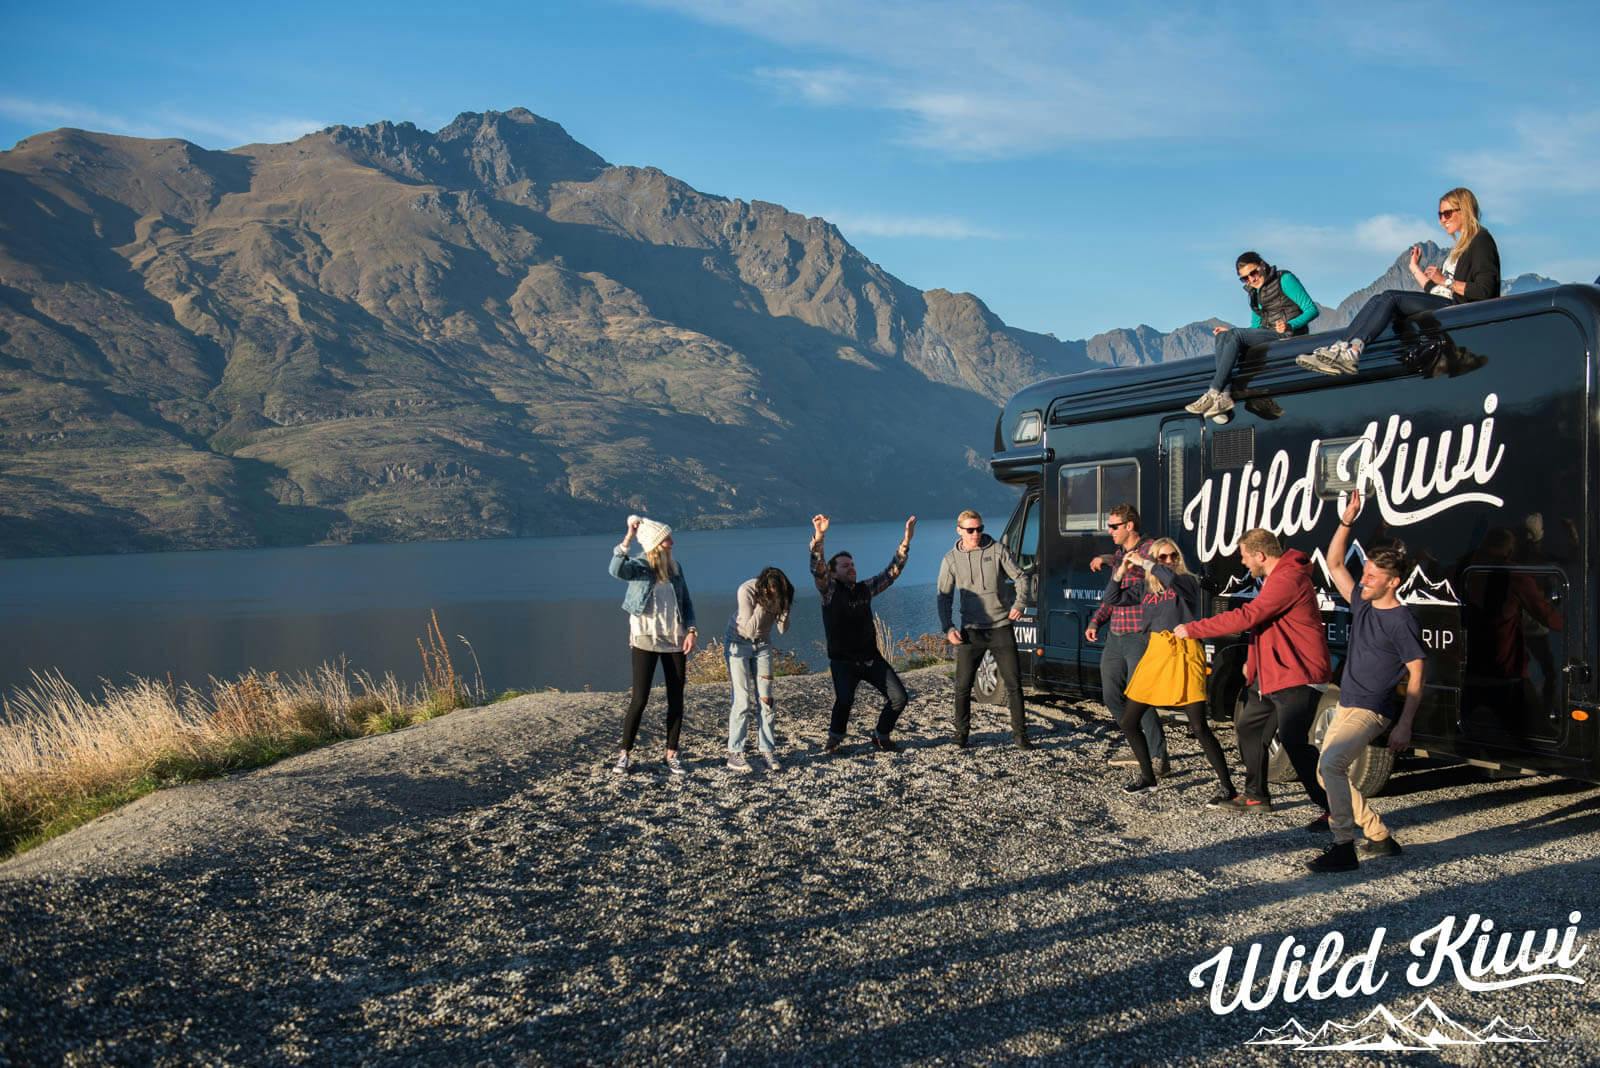 See the world in a new light in New Zealand - Rediscover yourself